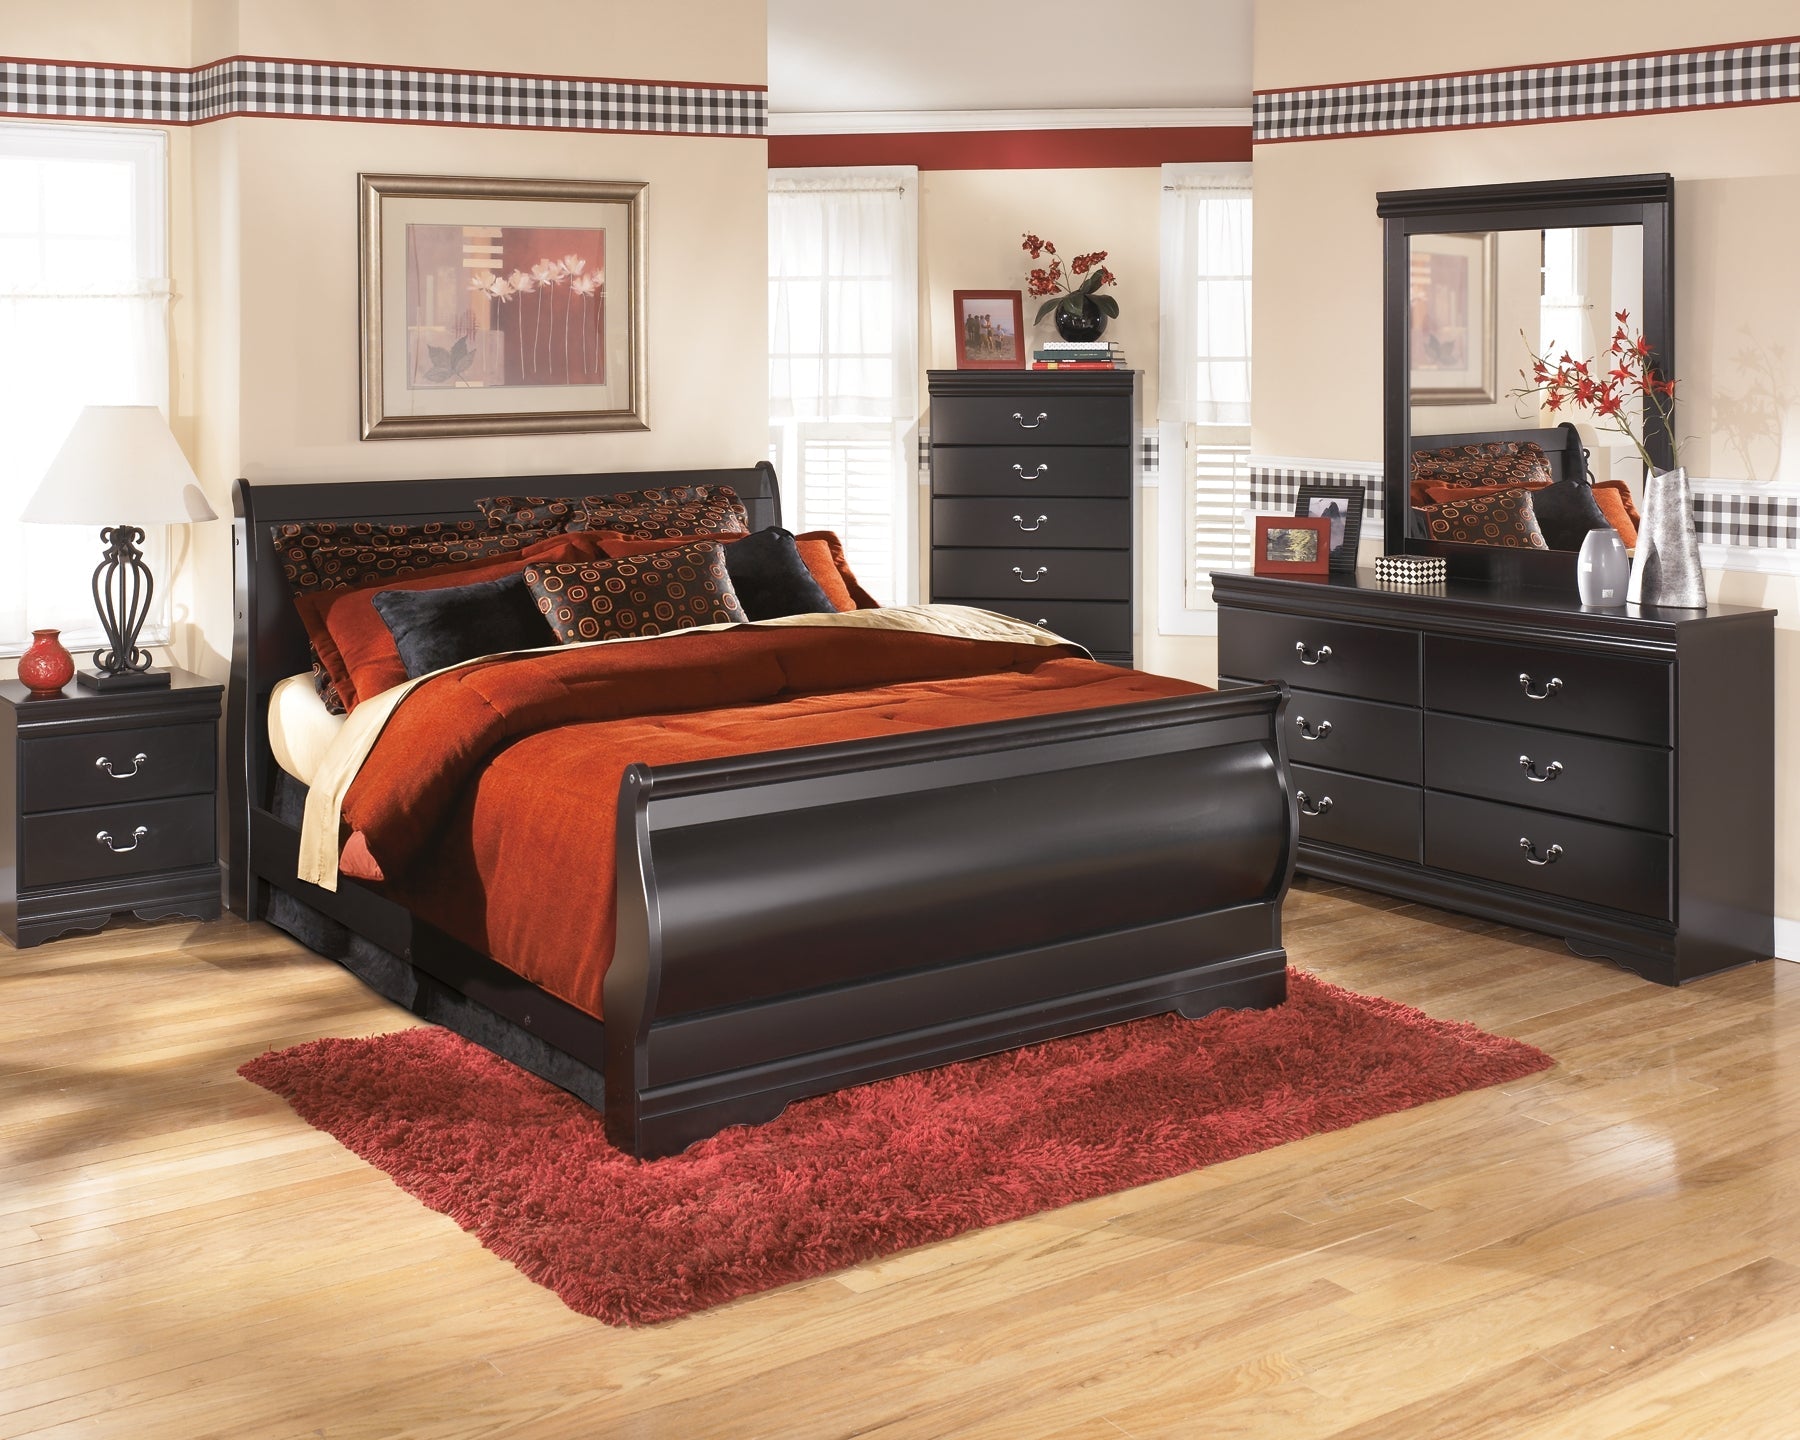 Huey Vineyard Two Drawer Night Stand at Walker Mattress and Furniture Locations in Cedar Park and Belton TX.